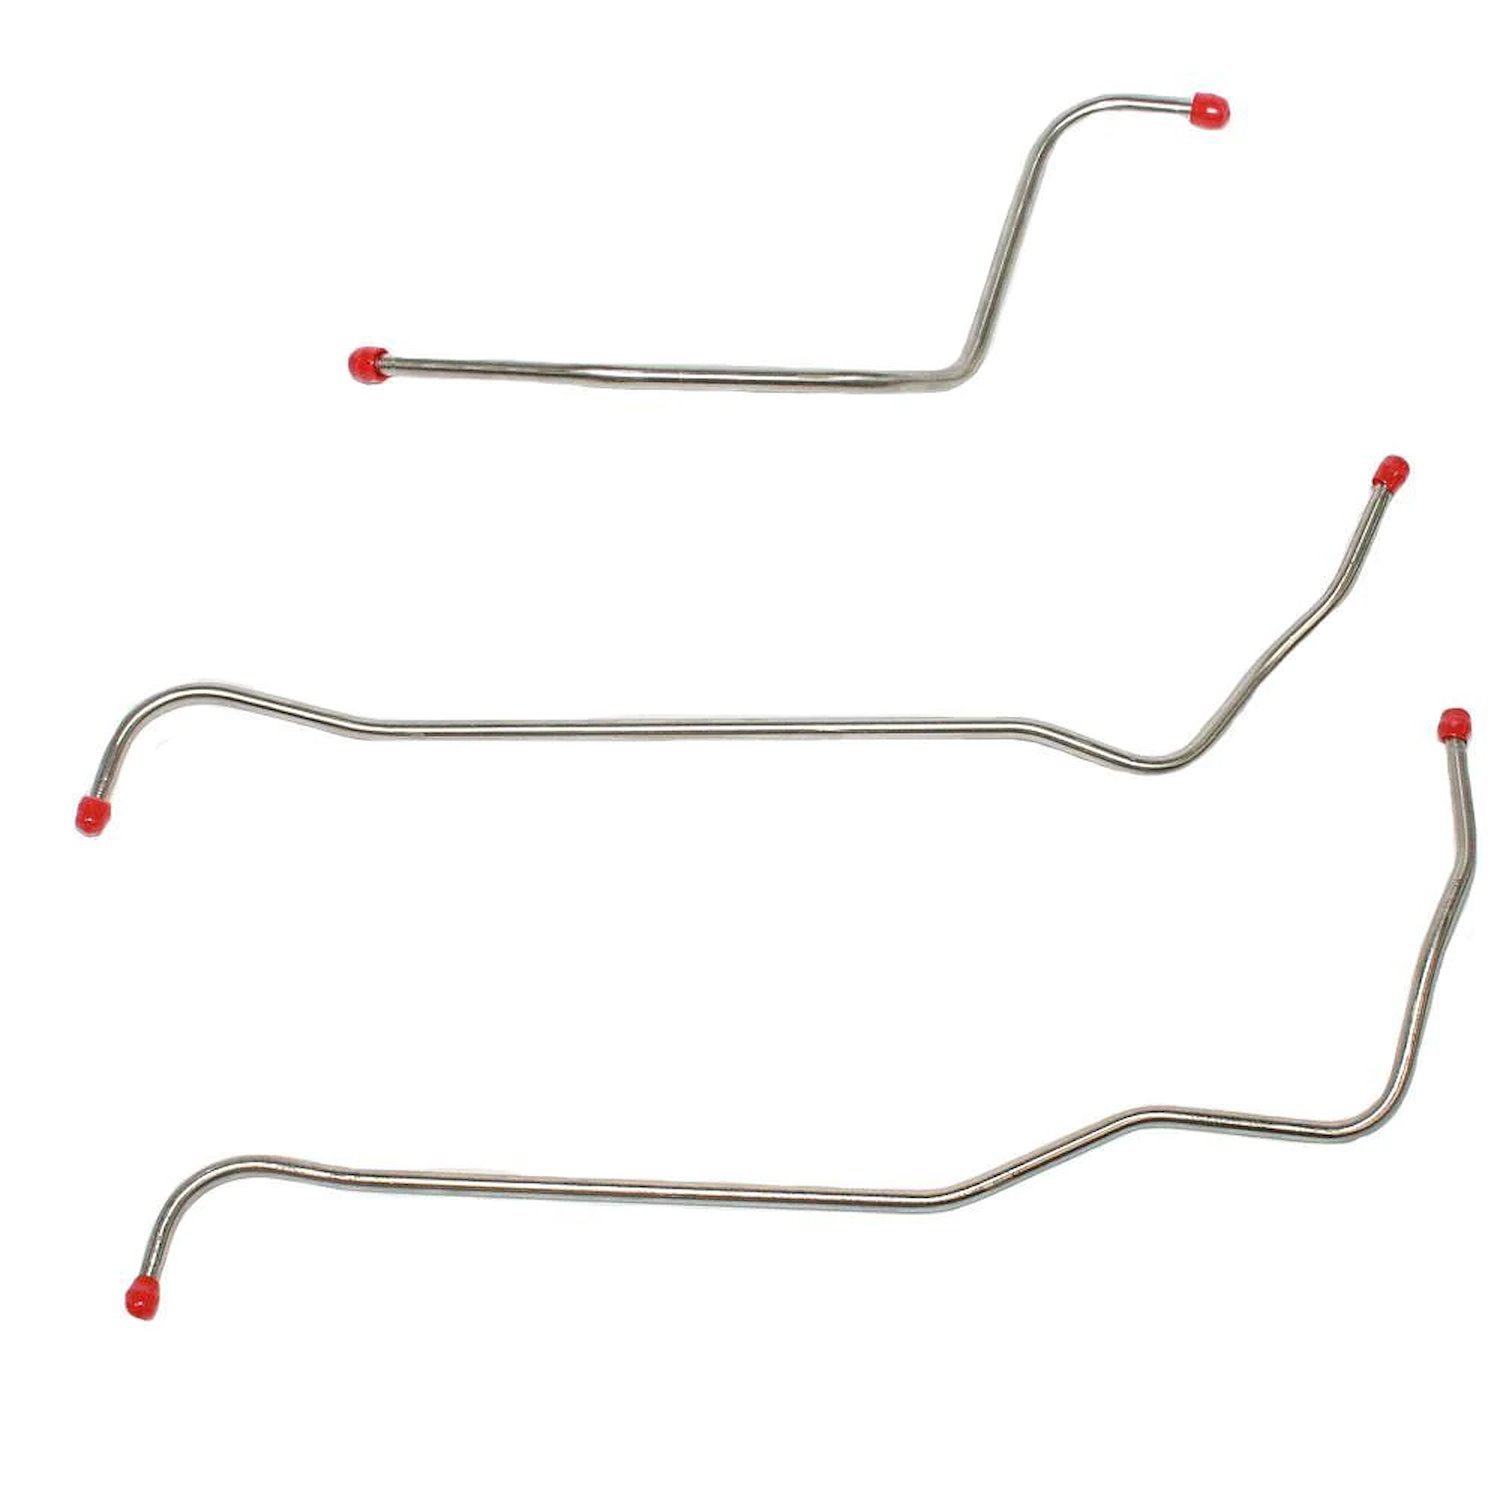 Fuel Tank Vent Lines for 1971-1972 GM Chevelle, Cutlass, 442, GS, Monte Carlo, GTO, Lemans, Skylark [Stainless Steel]